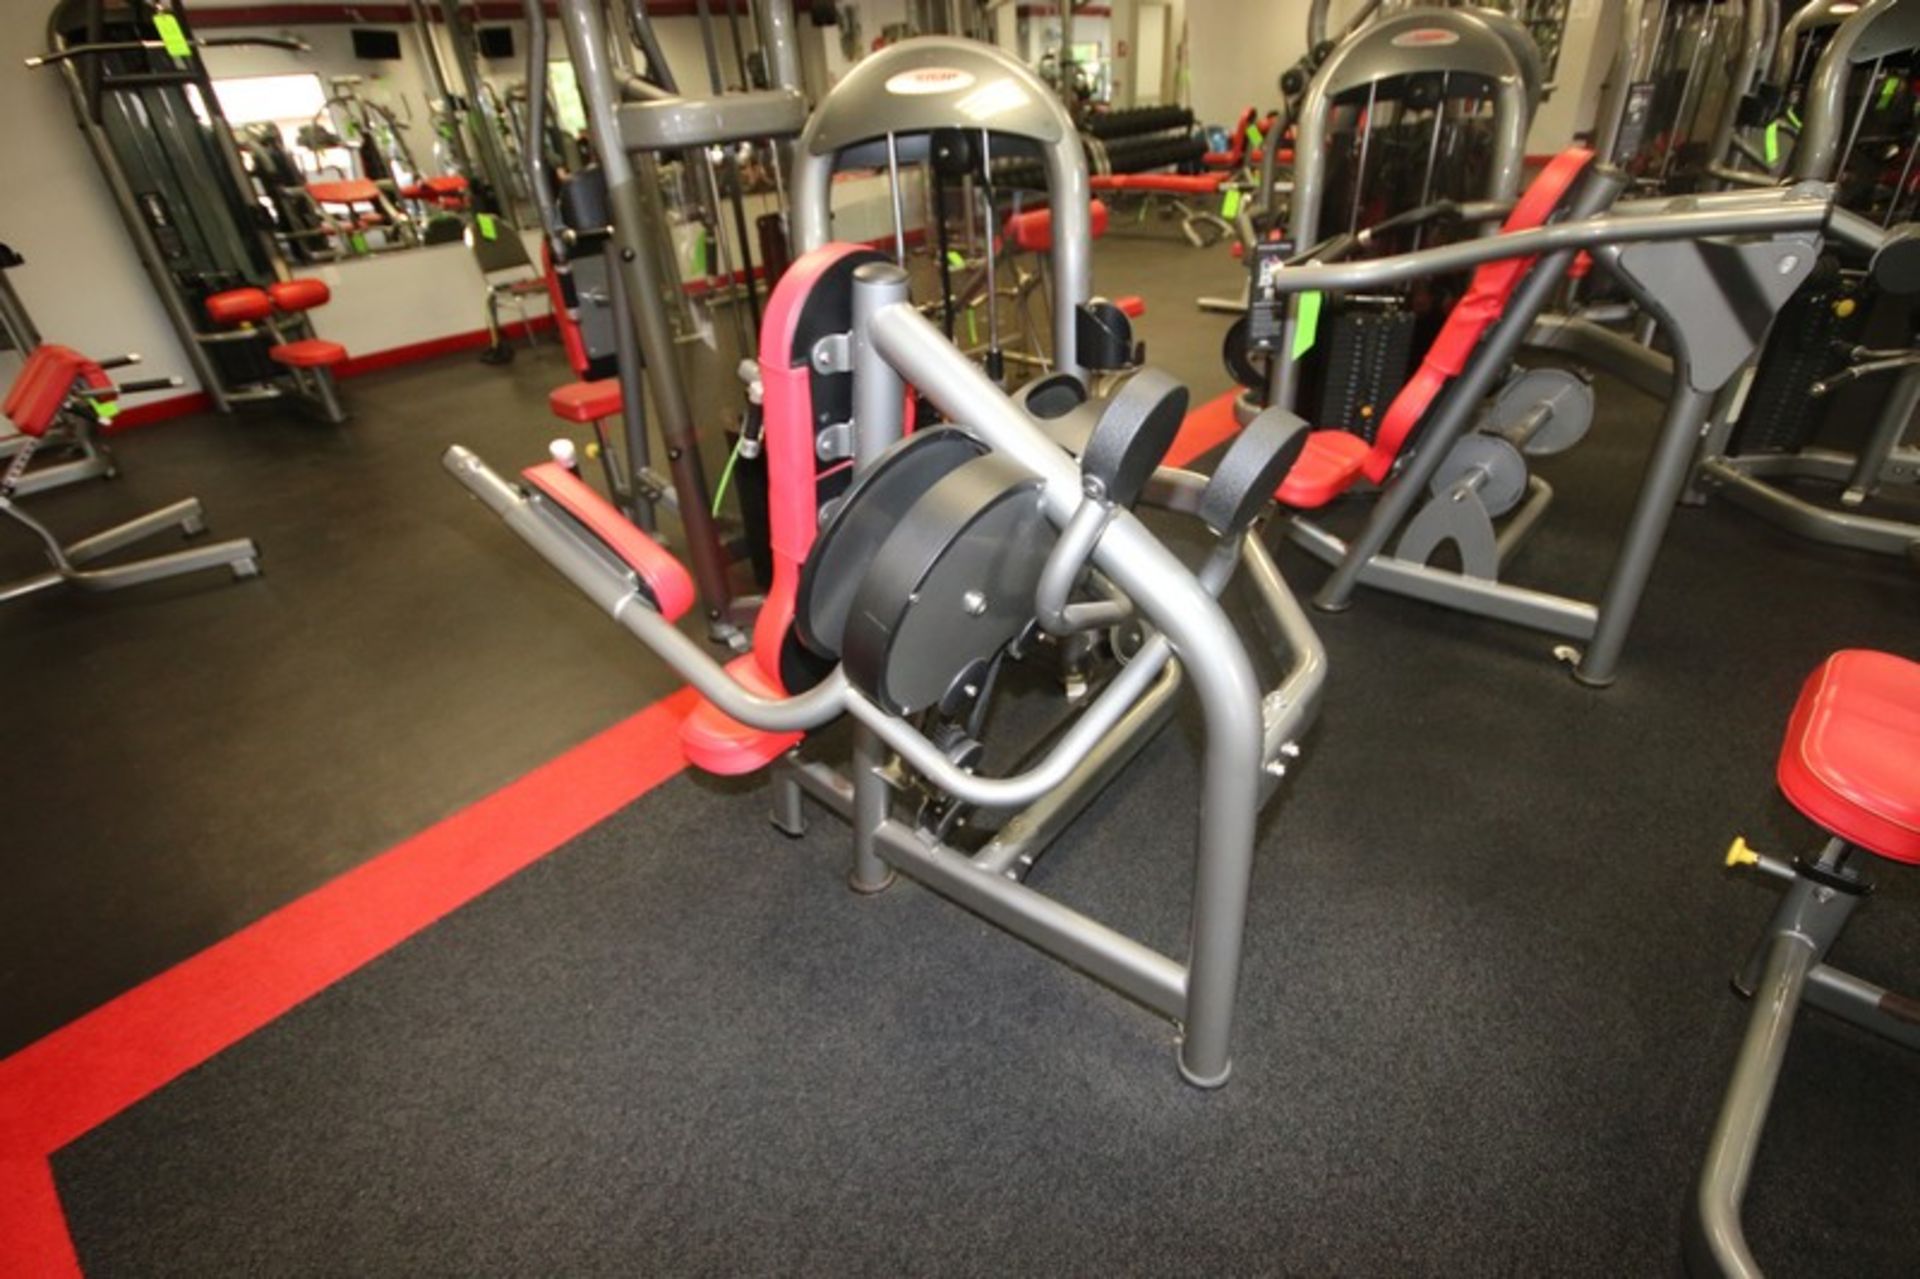 Matrix Lateral Raise Cable Machine, 10-200 lbs. Weight Range on Plates, Overall Dims.: Aprox. 48" - Image 2 of 5